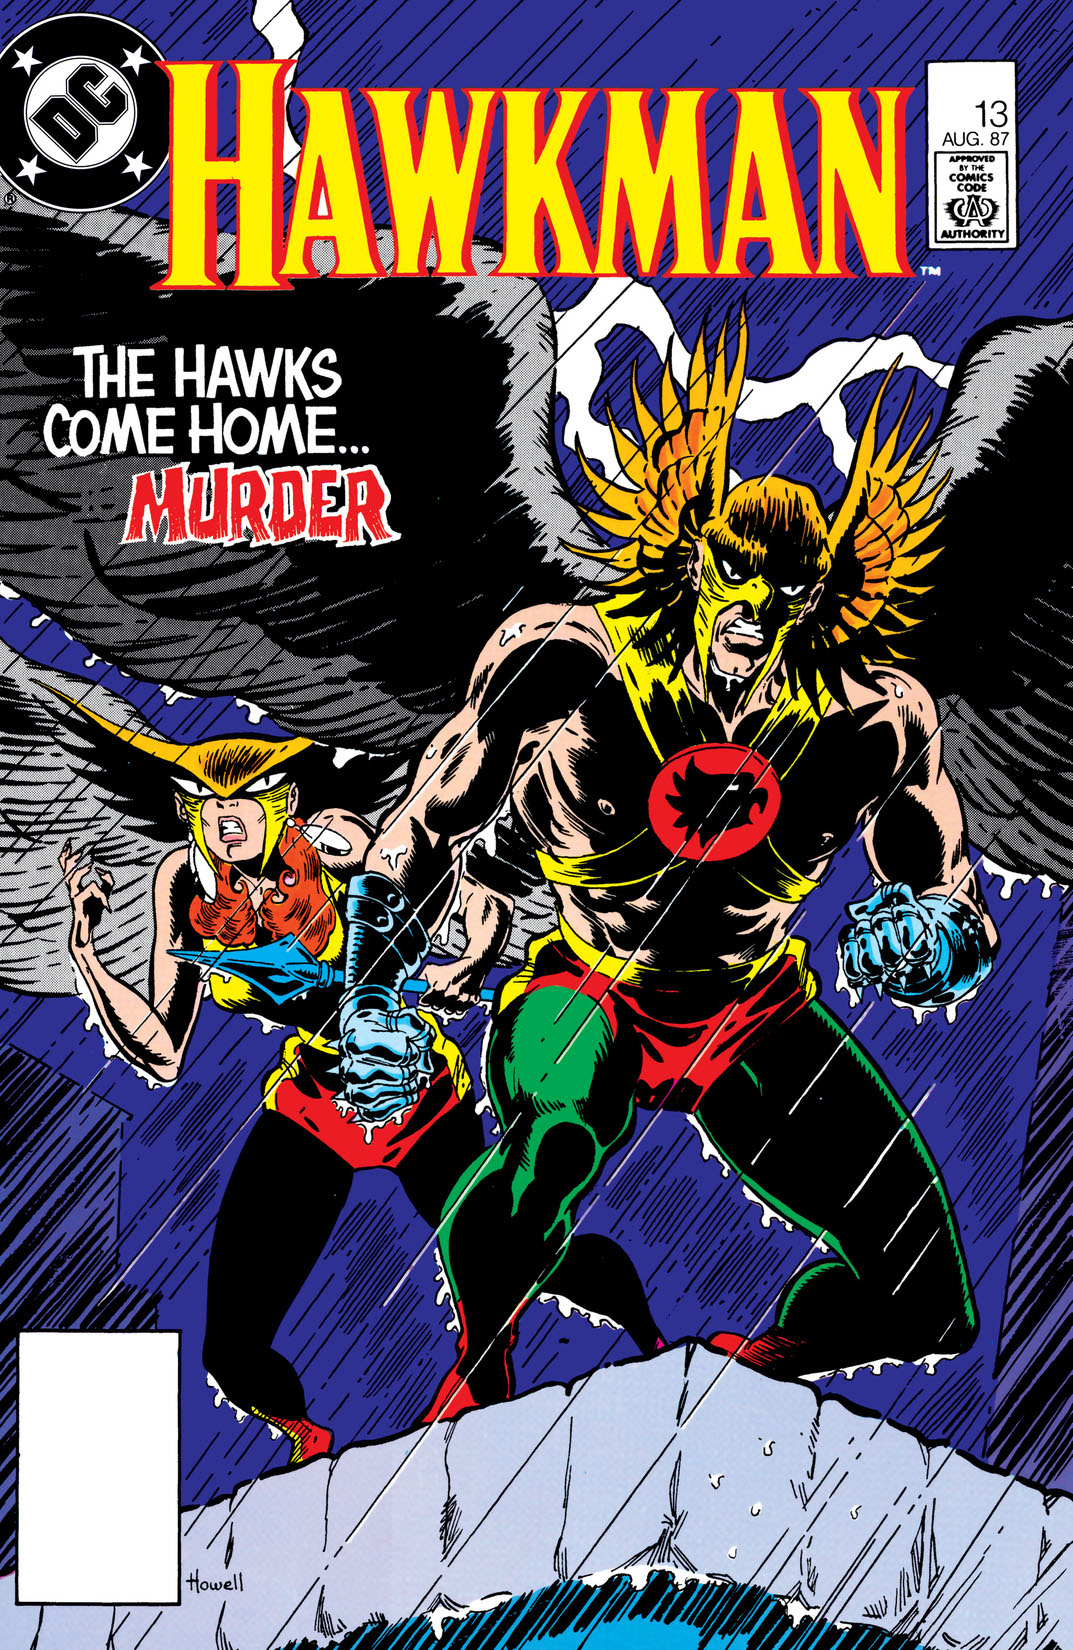 Hawkman (1986-) #13 preview images